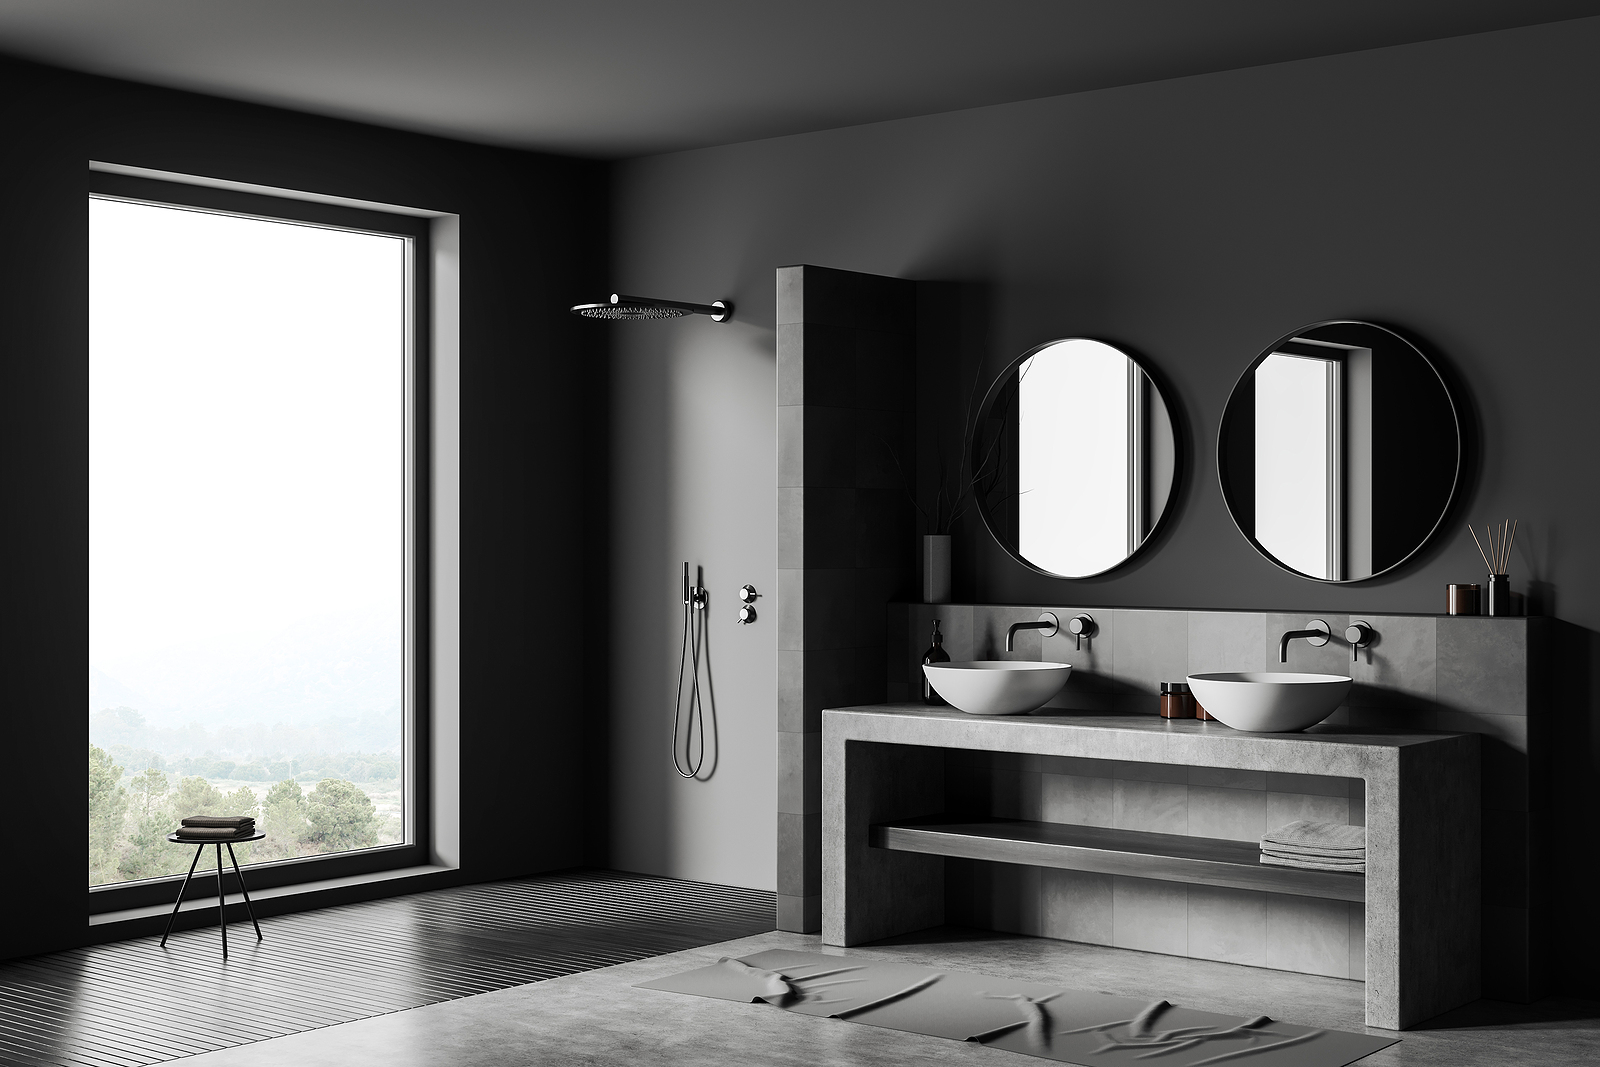 Interior Designers Share the Bathroom Trends in and Out This Season